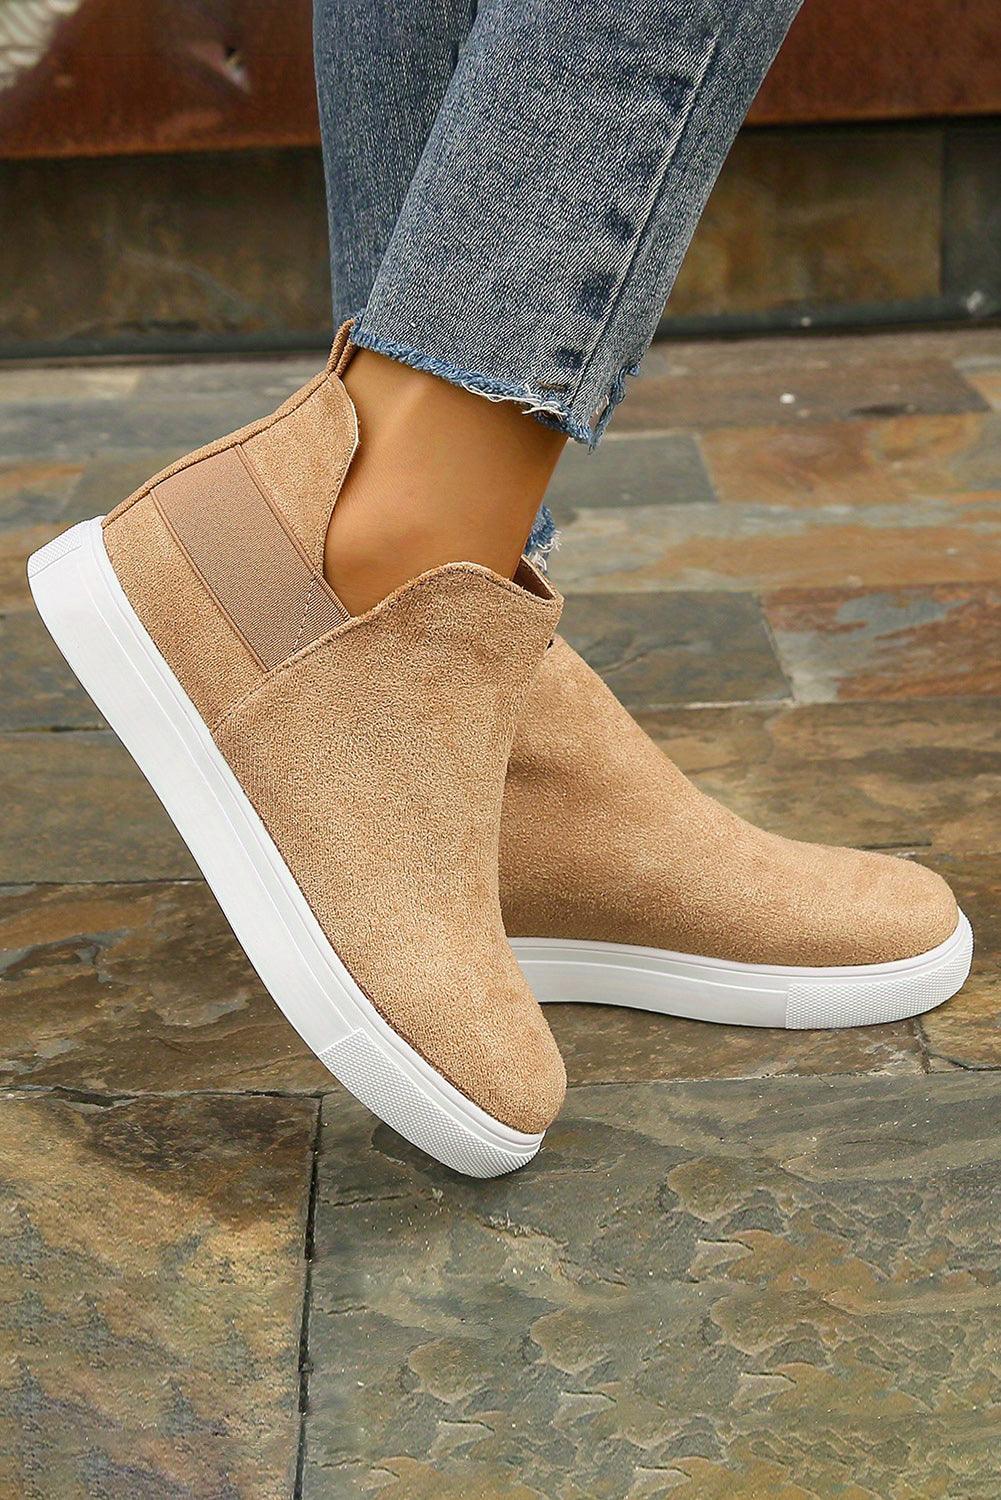 Camel High Top Slip-on Casual Sneakers - L & M Kee, LLC